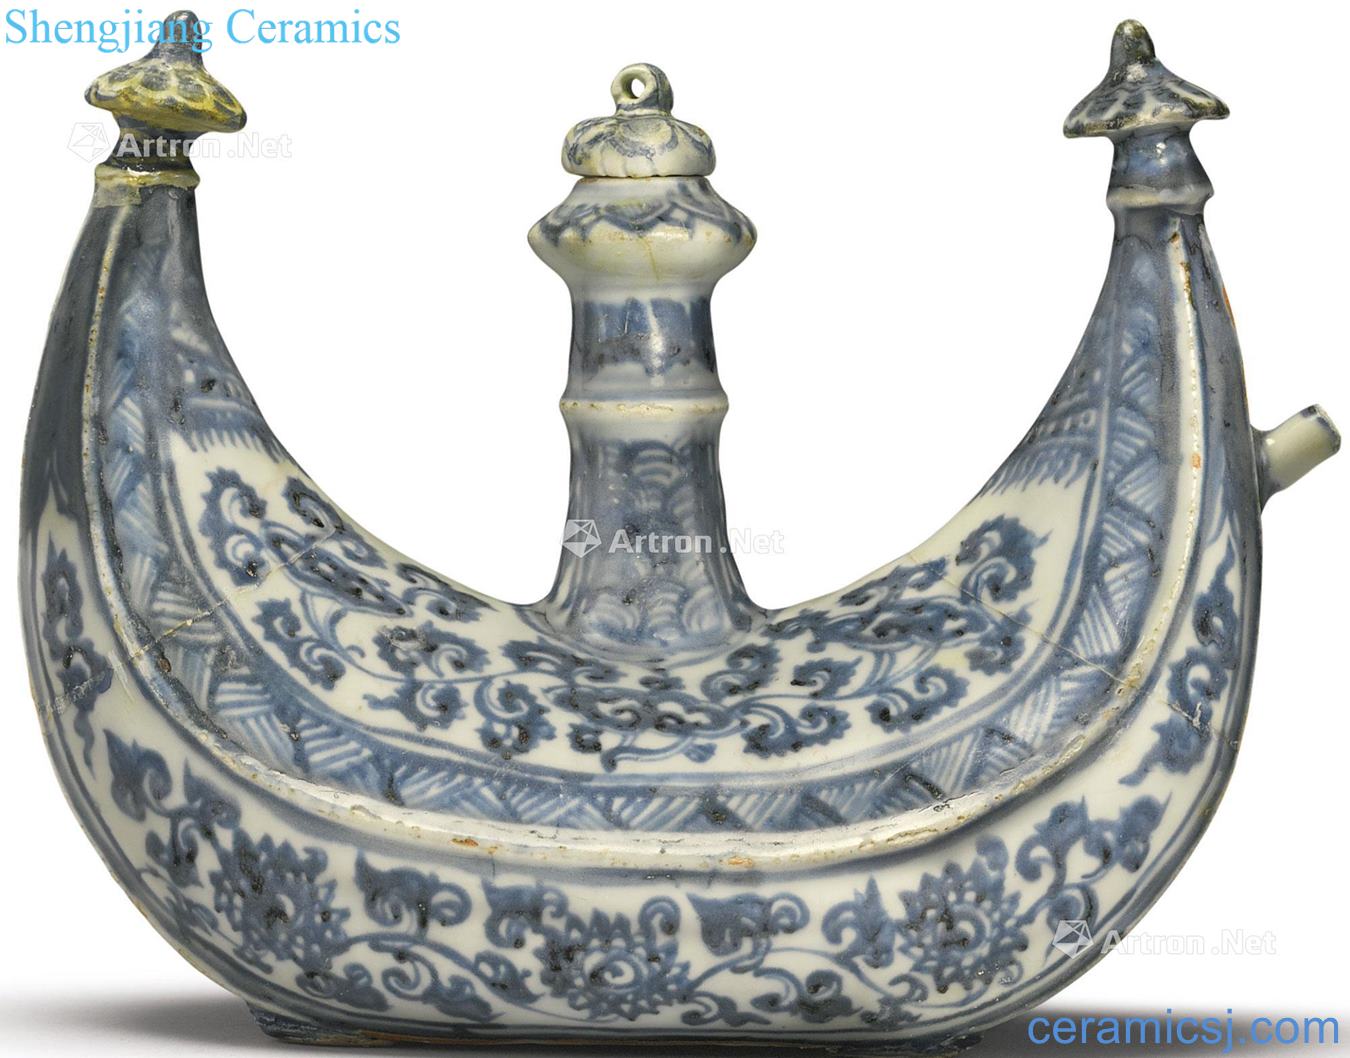 The 15th/16th century Blue and white flowers around branches grain waxing crescent shaped hip flask with cover